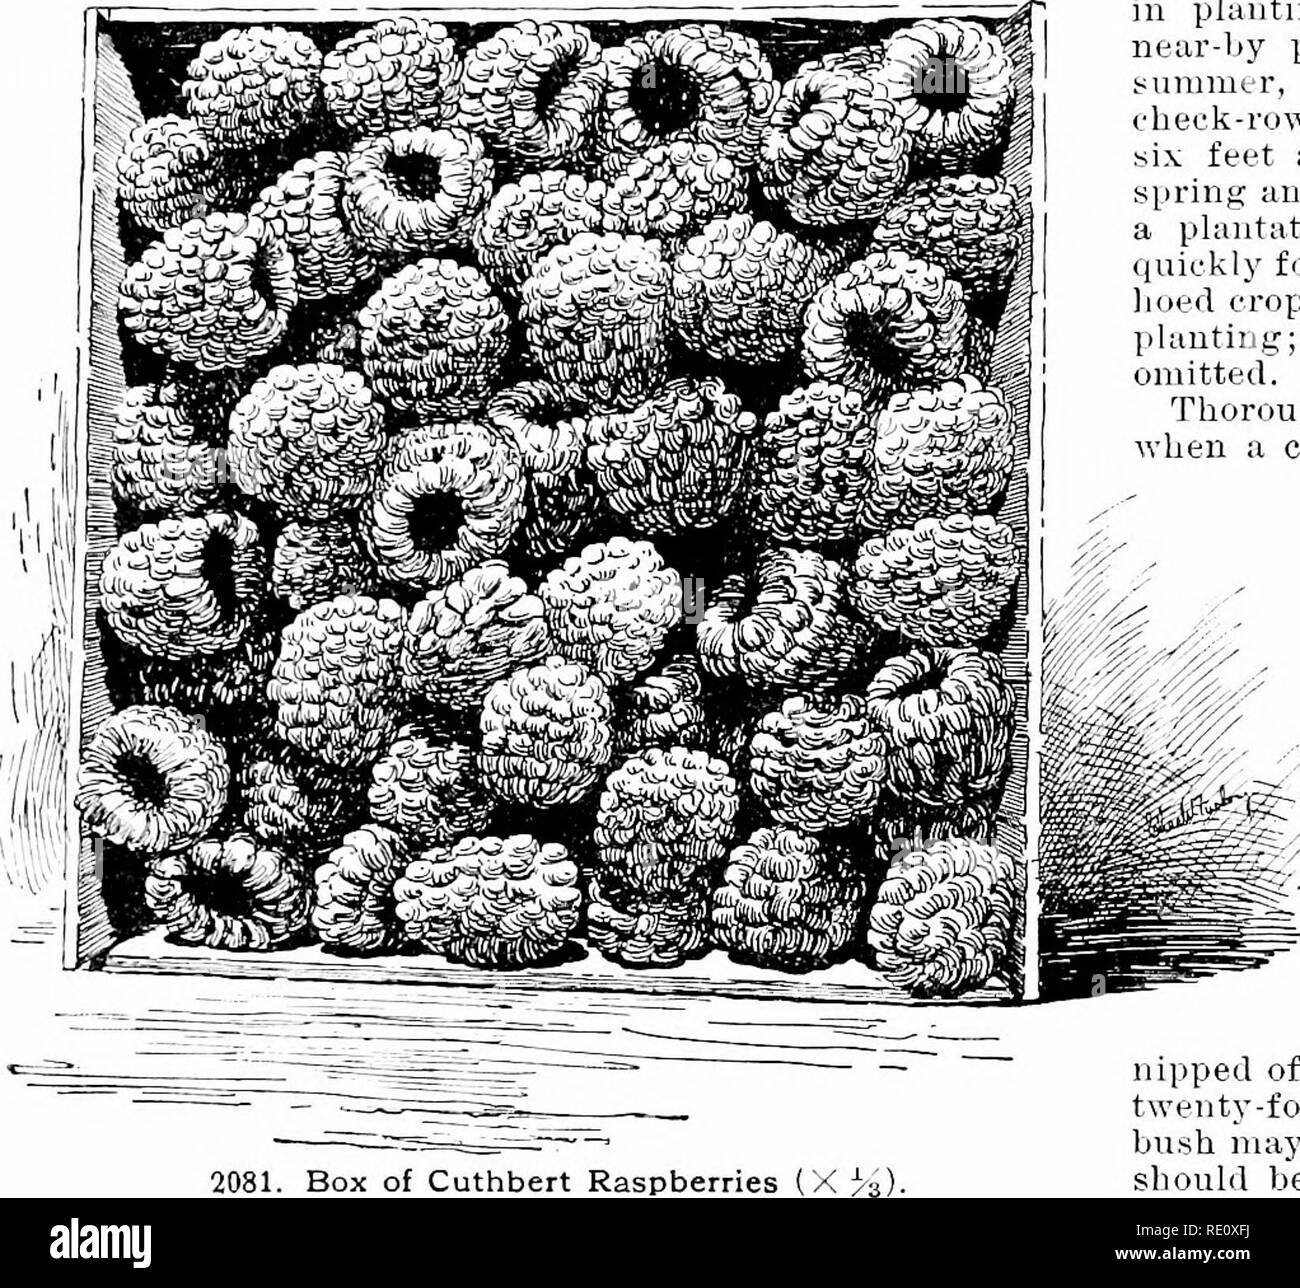 . Cyclopedia of American horticulture, comprising suggestions for cultivation of horticultural plants, descriptions of the species of fruits, vegetables, flowers, and ornamental plants sold in the United States and Canada, together with geographical and biographical sketches. Gardening. 1502 RASPBERRY coiKlitions would not warrant the growinsr of fruit to be soM fresh. Hybrids of it', striuosii^ and Ii. vcc'nlen- tuUs-known as i?. nef/fectns-h&amp;ve given the purple- cane class, of which Shaffer (Fig. 2082) is a leading example. For further notes on species of Raspberry, see Rubas. Raspberrie Stock Photo